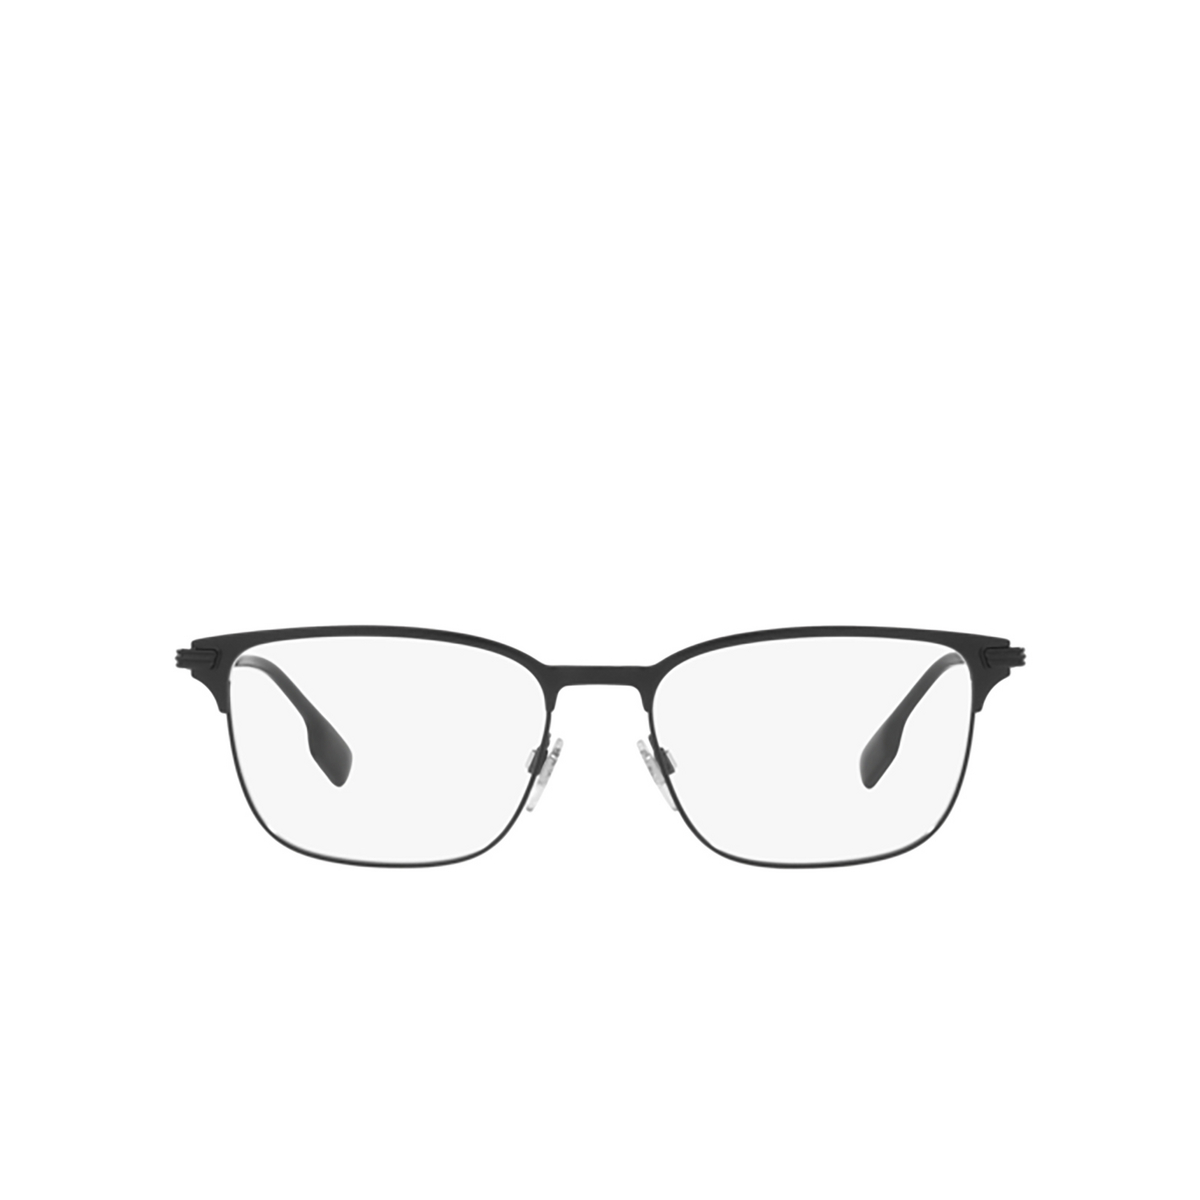 Burberry MALCOLM Eyeglasses 1007 Black - front view